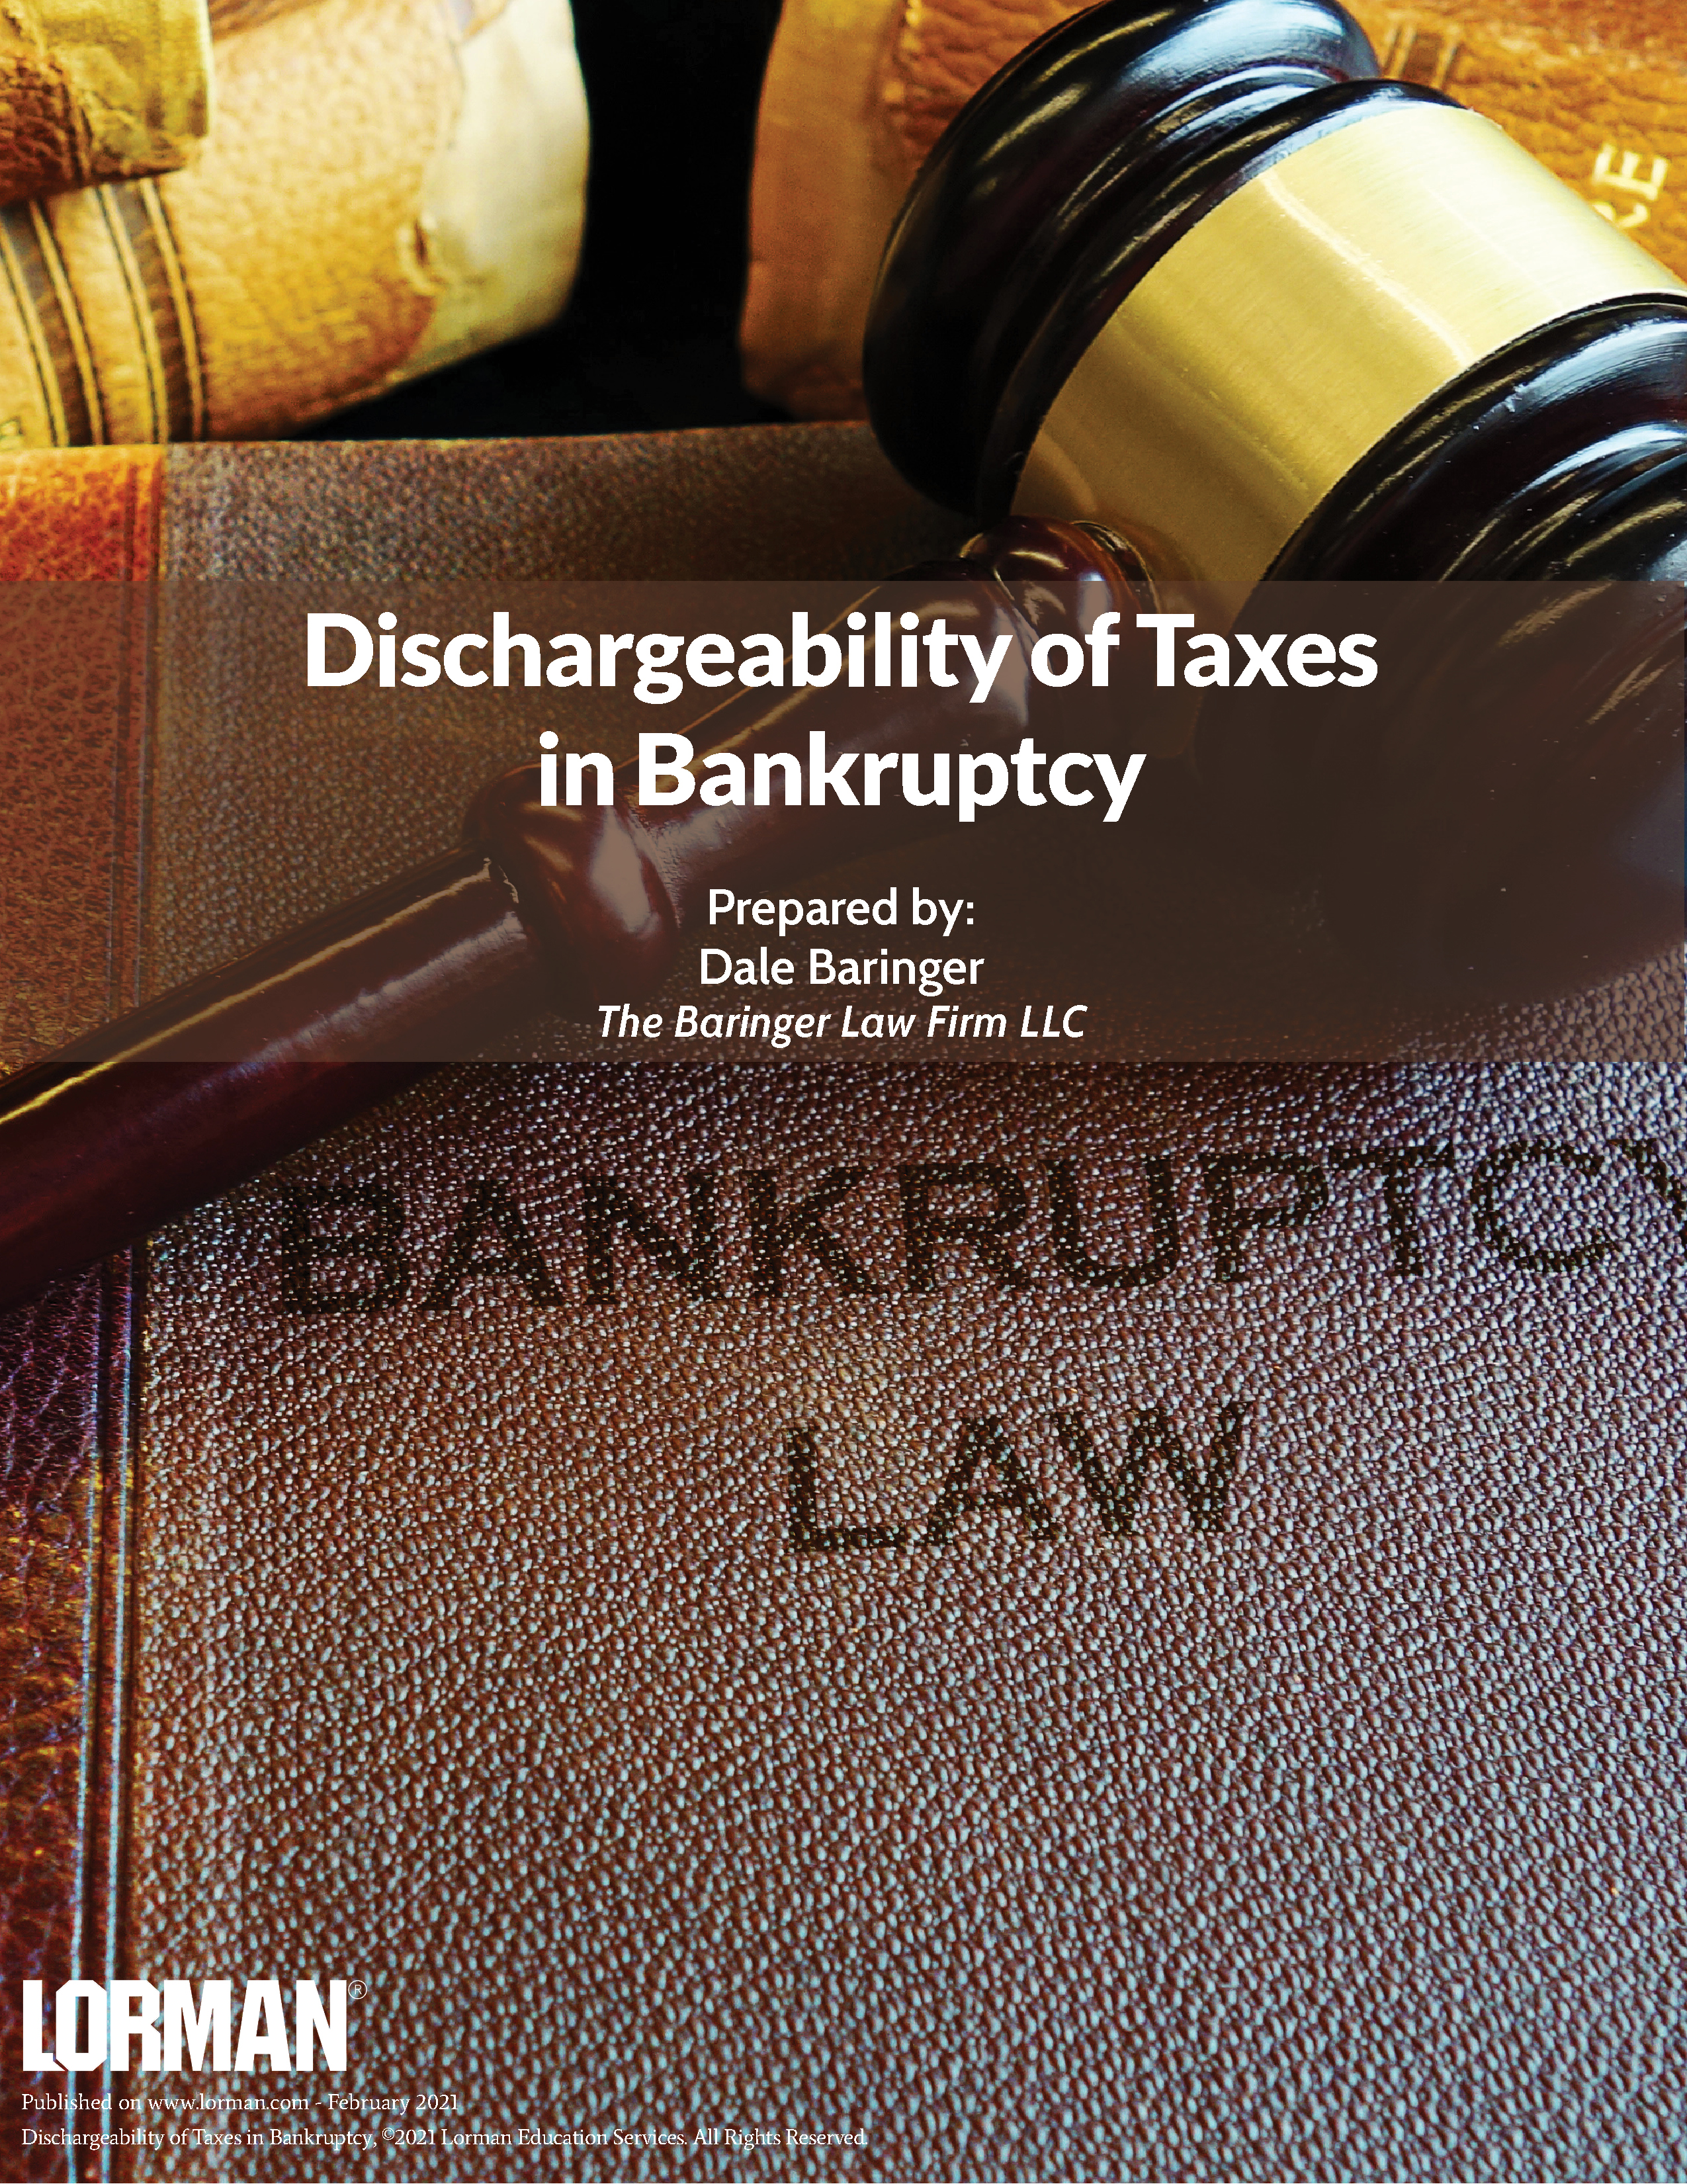 Dischargeability of Taxes in Bankruptcy